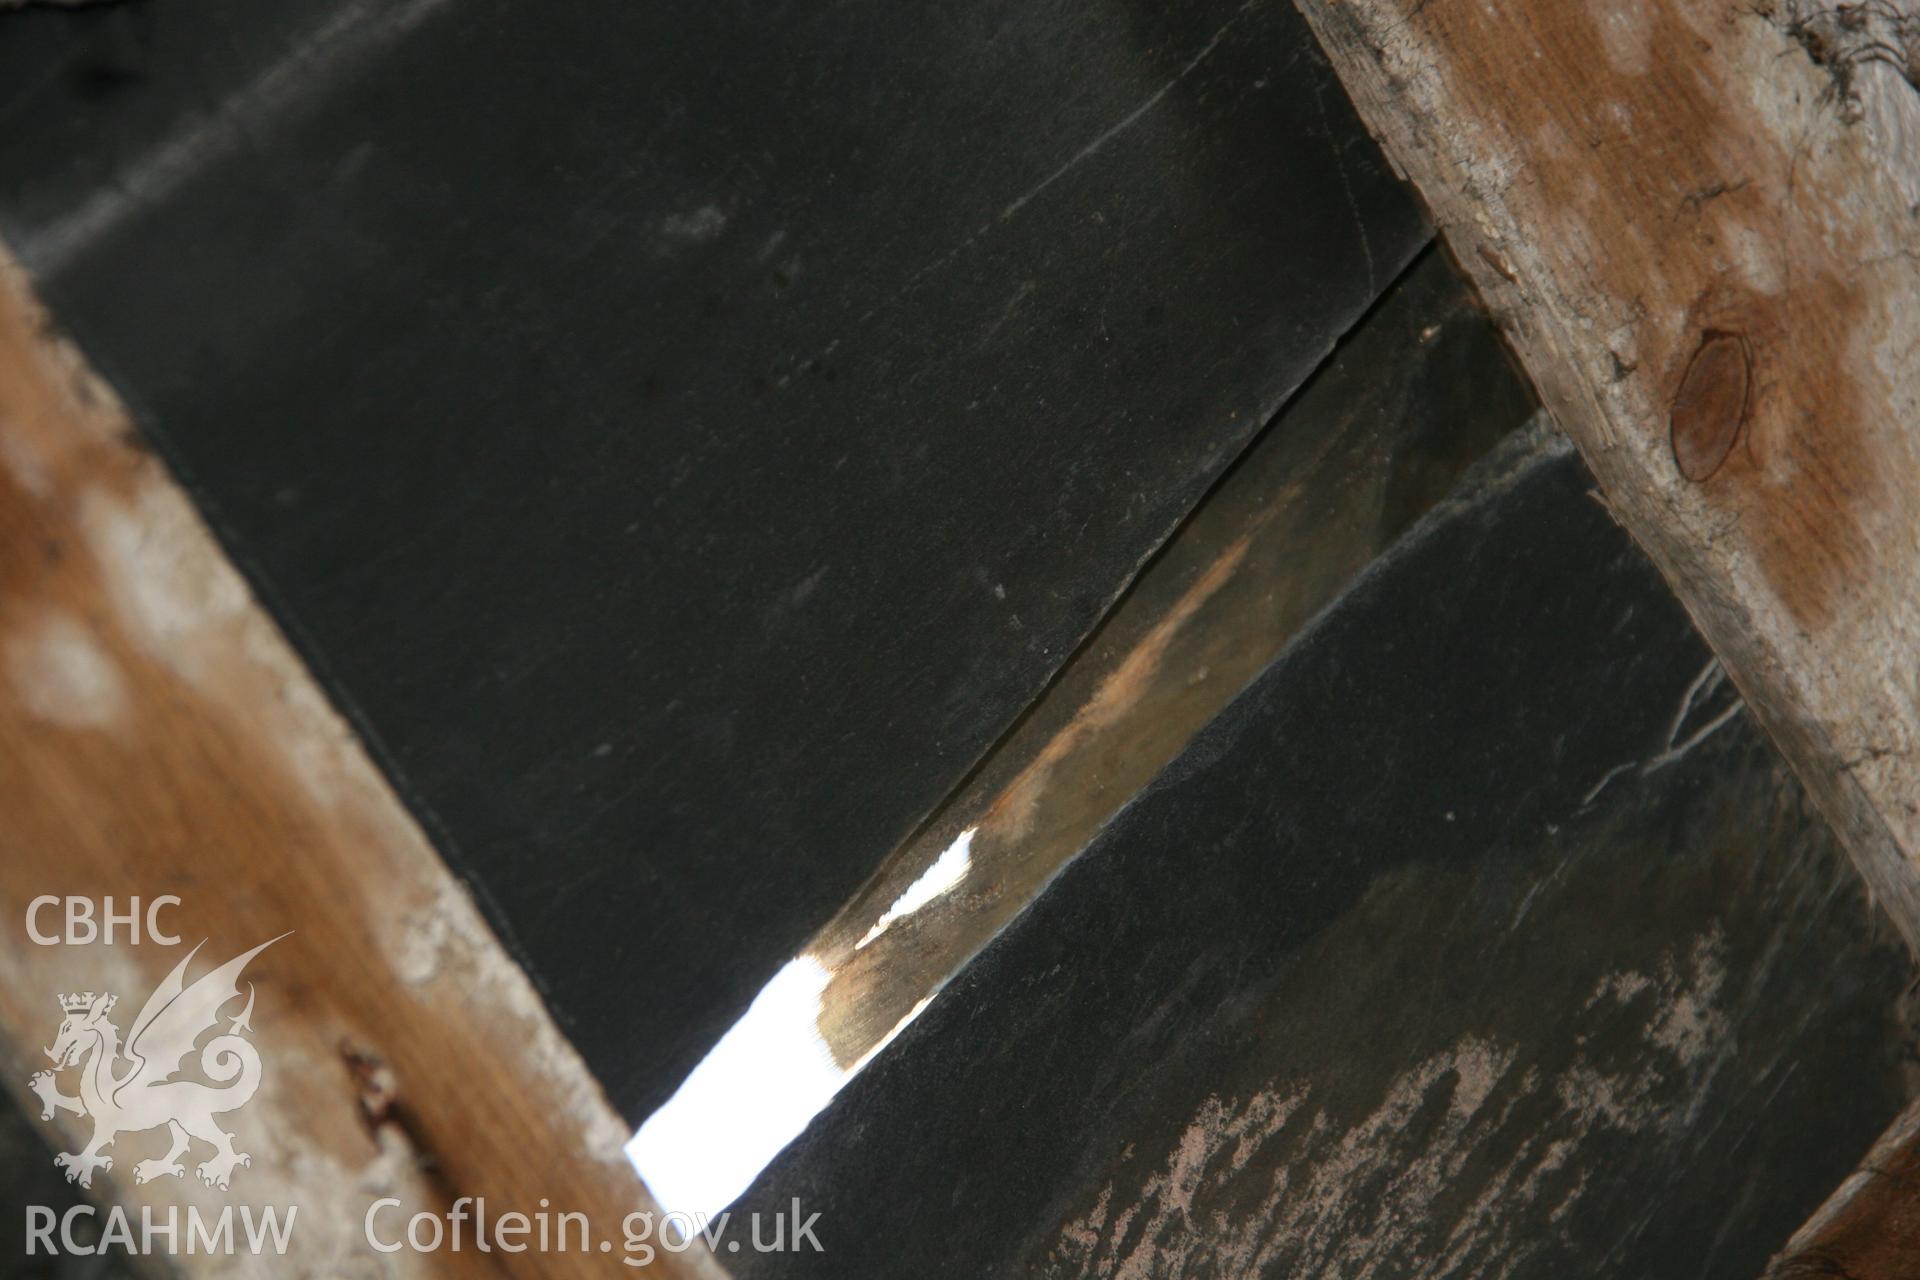 Photograph showing detailed interior view of exposed slate tile in the roof of the former Llawrybettws Welsh Calvinistic Methodist chapel, Glanyrafon, Corwen. Produced by Tim Allen on 27th February 2019 to meet a condition attached to planning application.